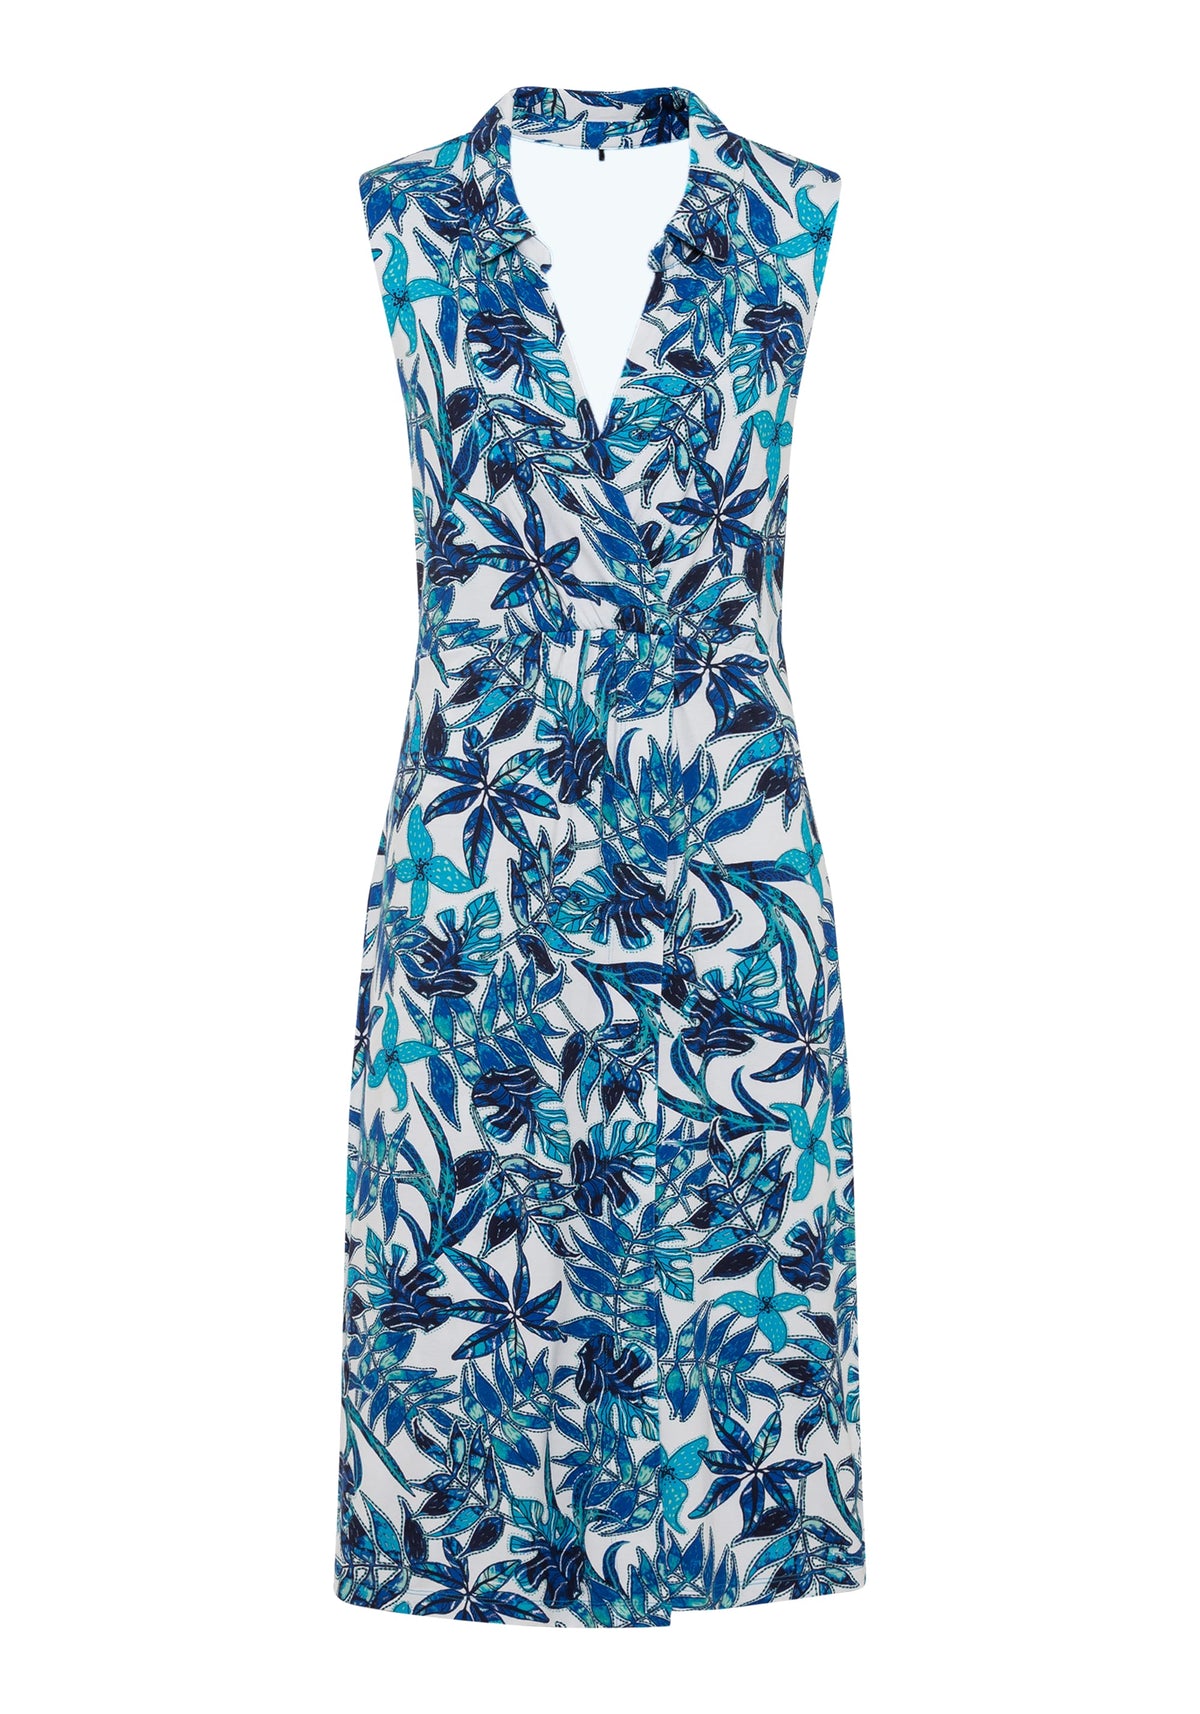 Sleeveless Tropic Floral Faux Wrap Dress containing LENZING™ ECOVERO™